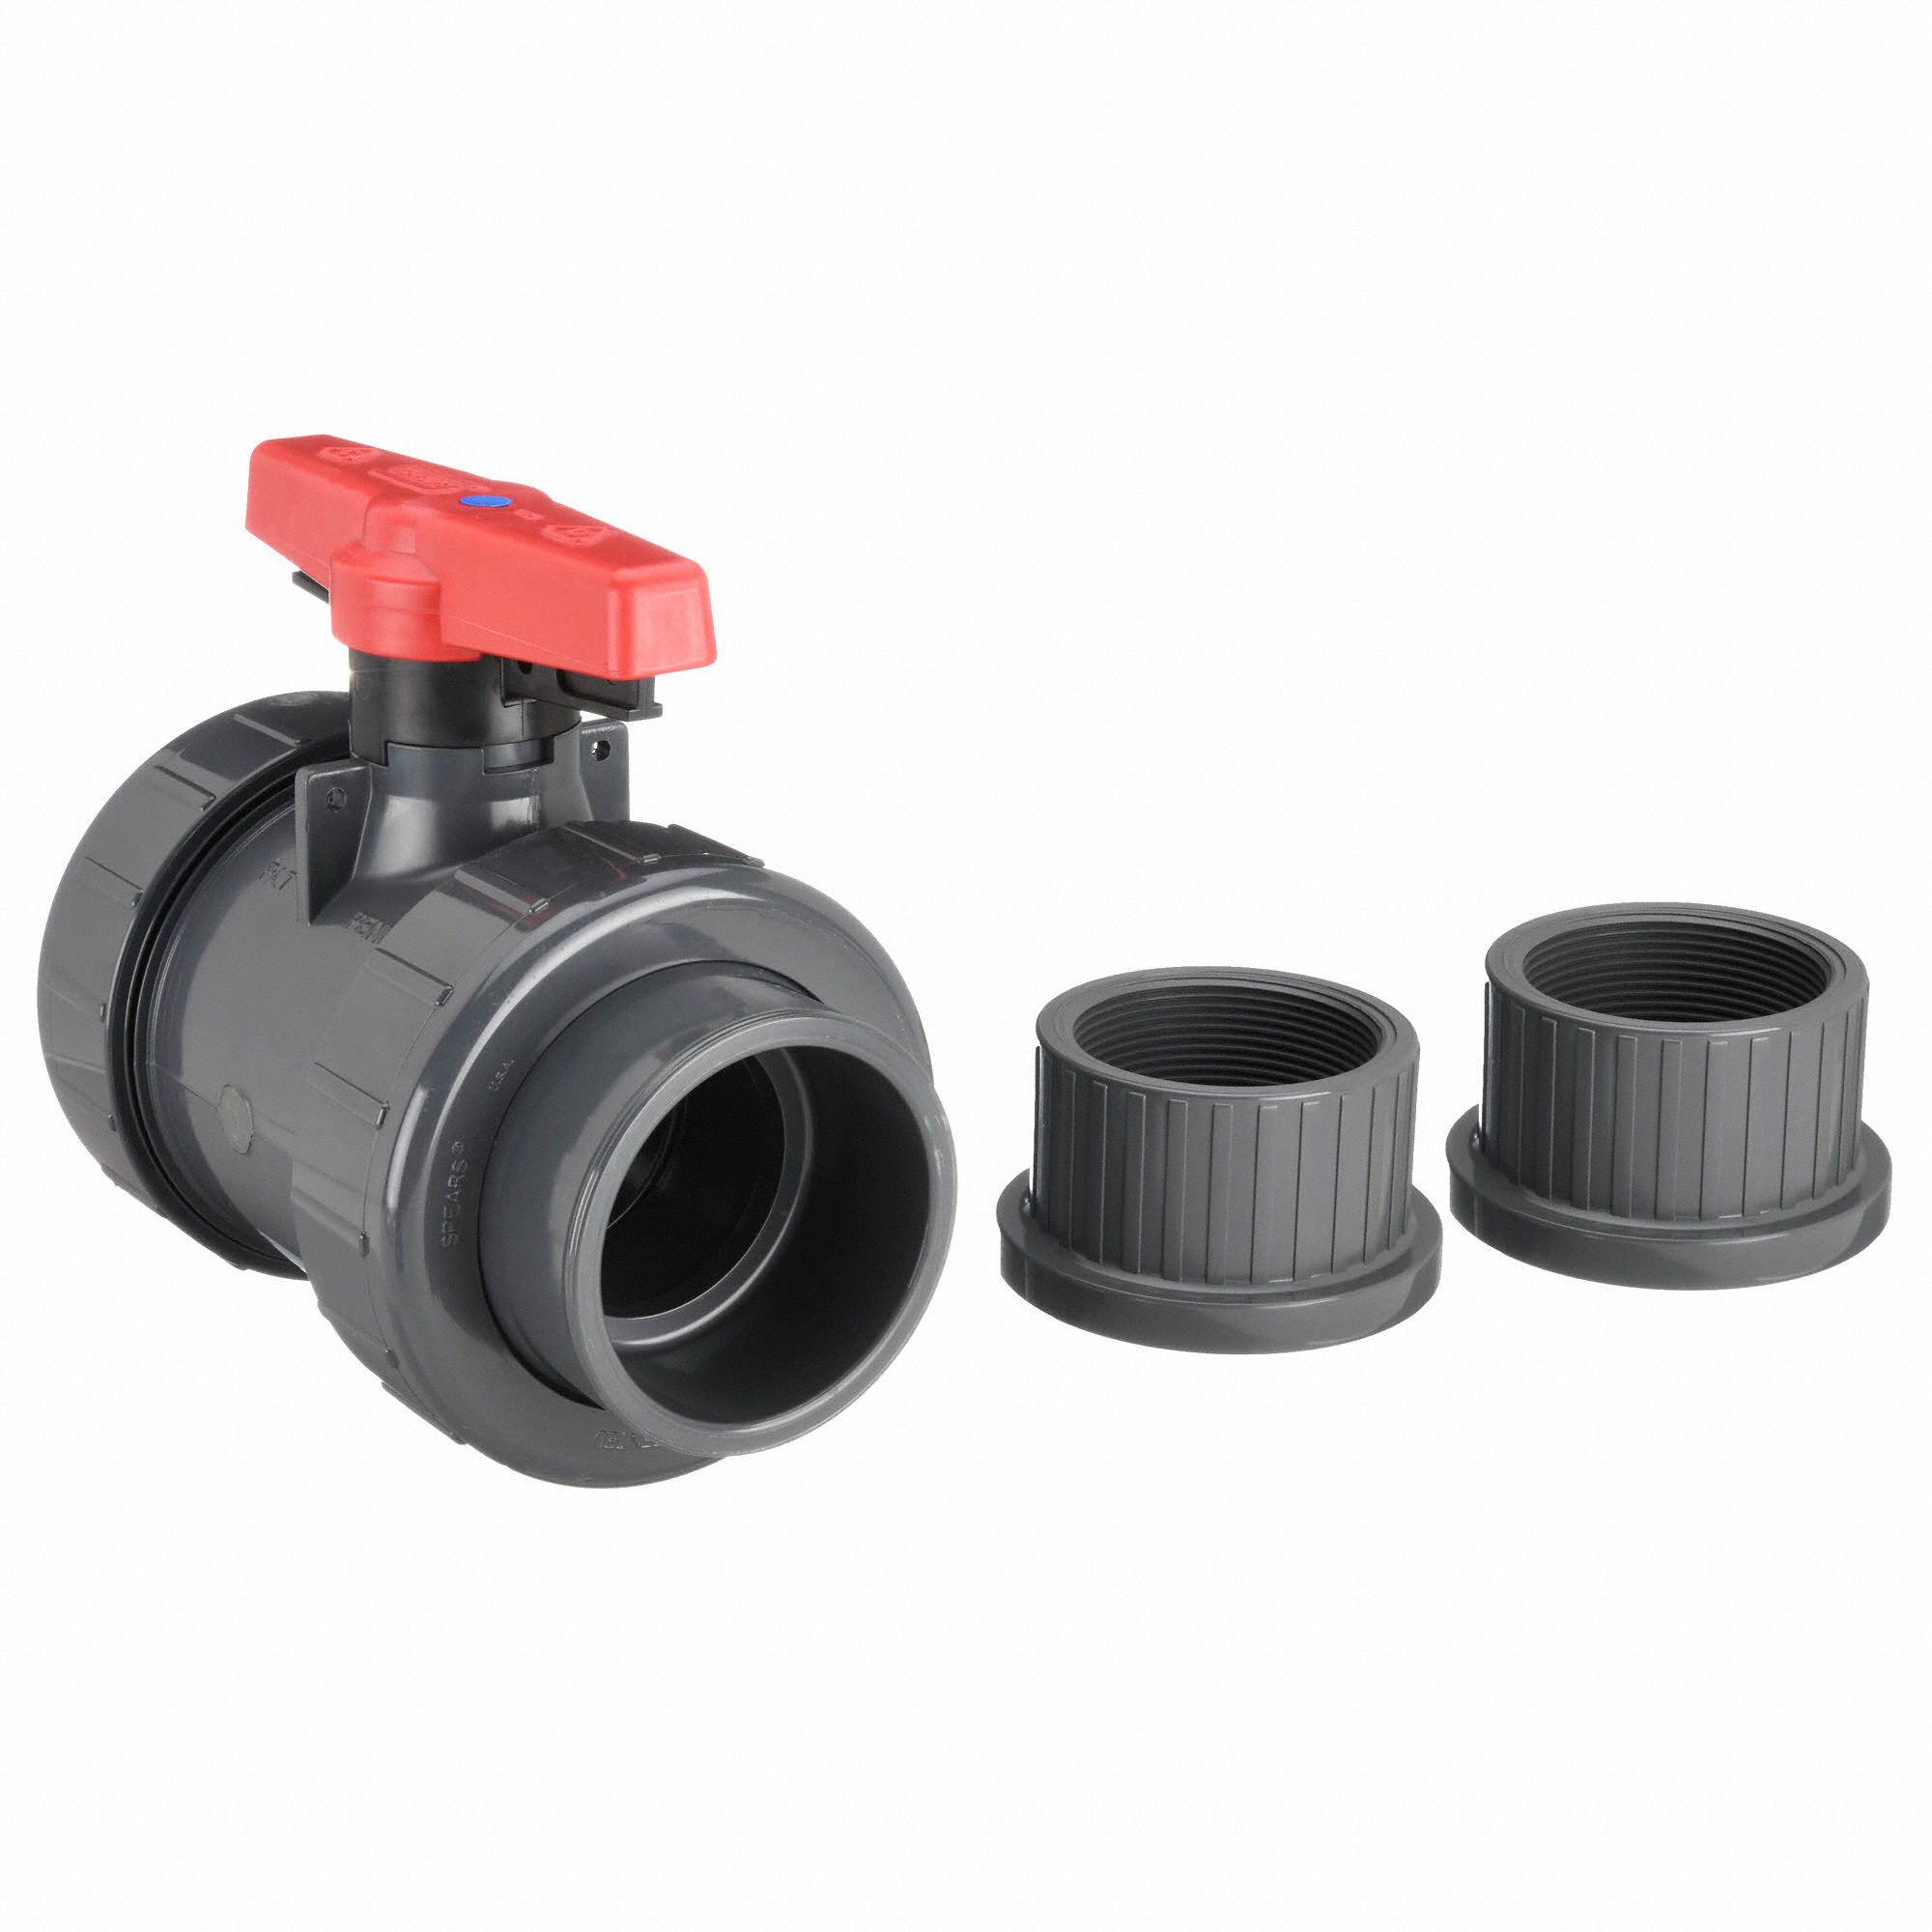 Spears 2132-005C 1/2" Socket Cpvc Compact Ball Valve Inline 